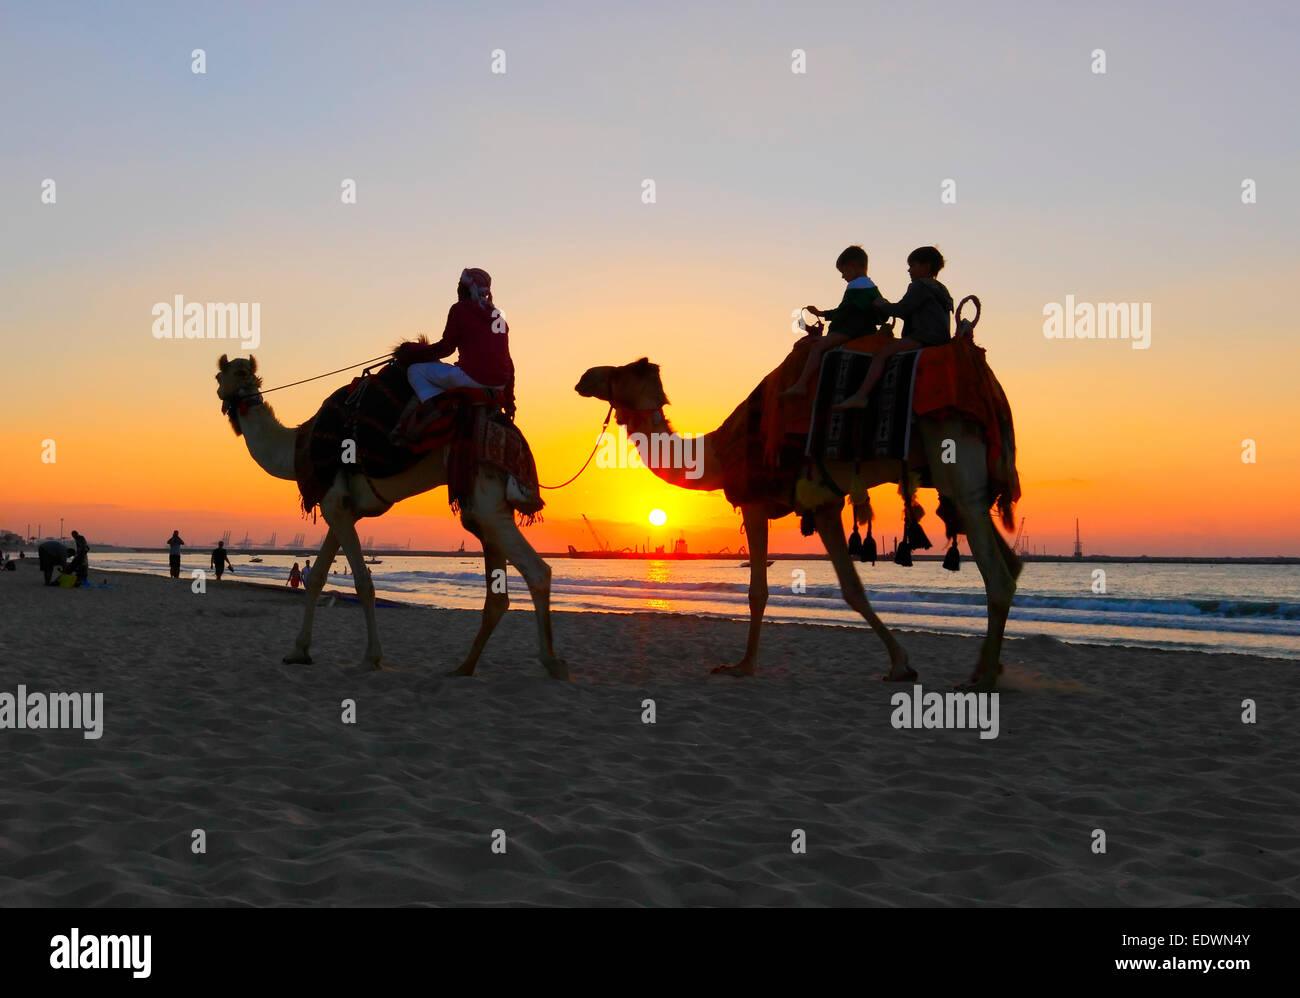 Camel ride on the beach at sunset in Dubai Stock Photo